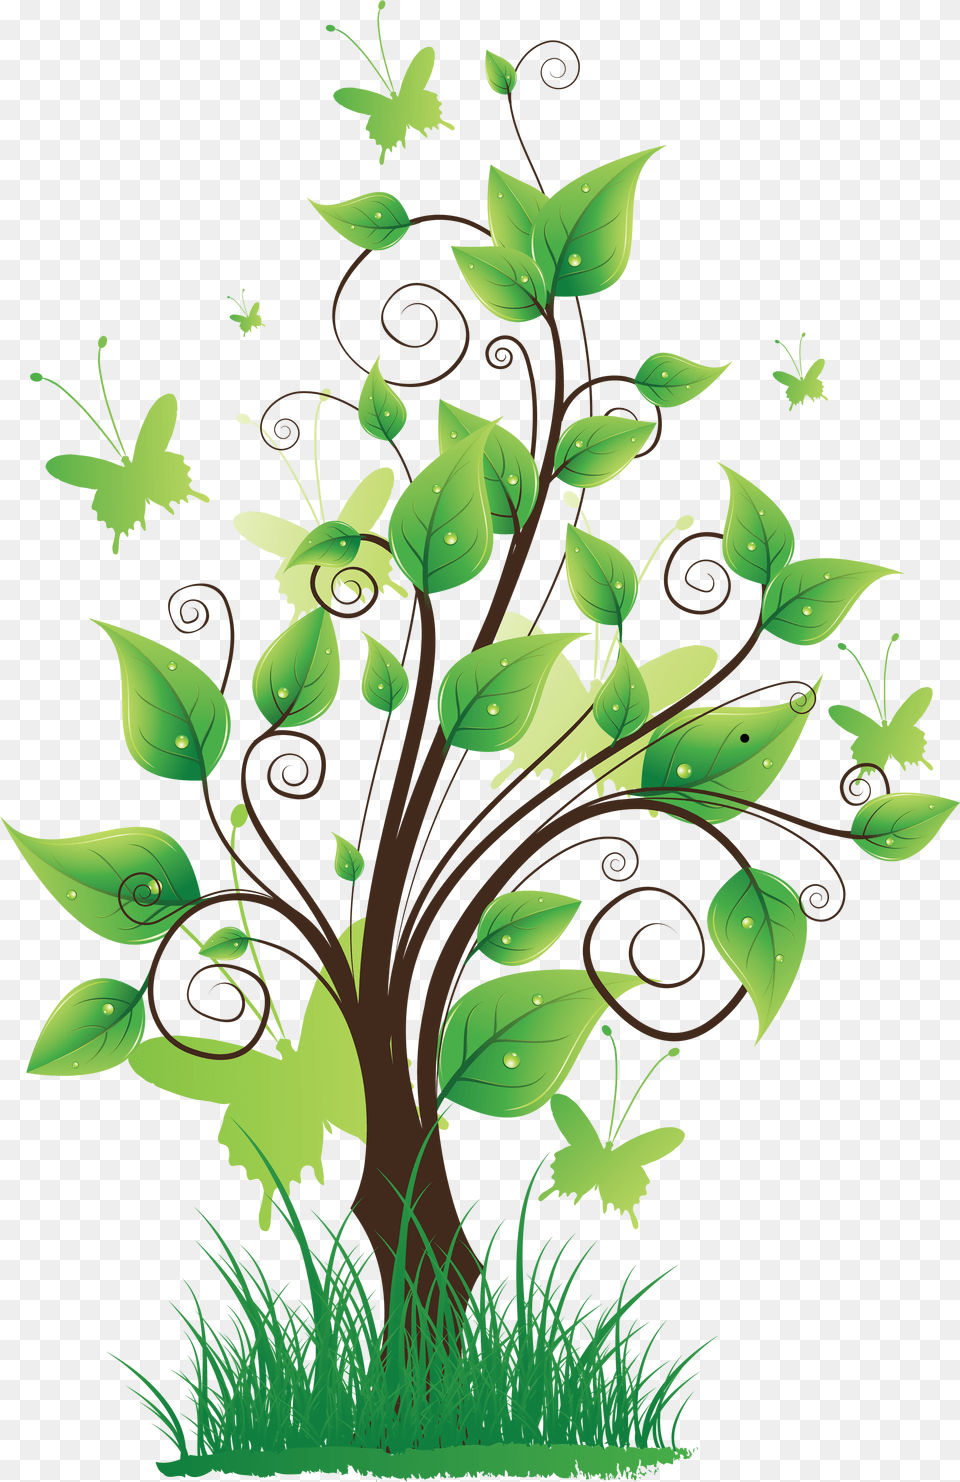 Tree Are Free To Download Nature Tree Background Design, Art, Floral Design, Graphics, Green Png Image